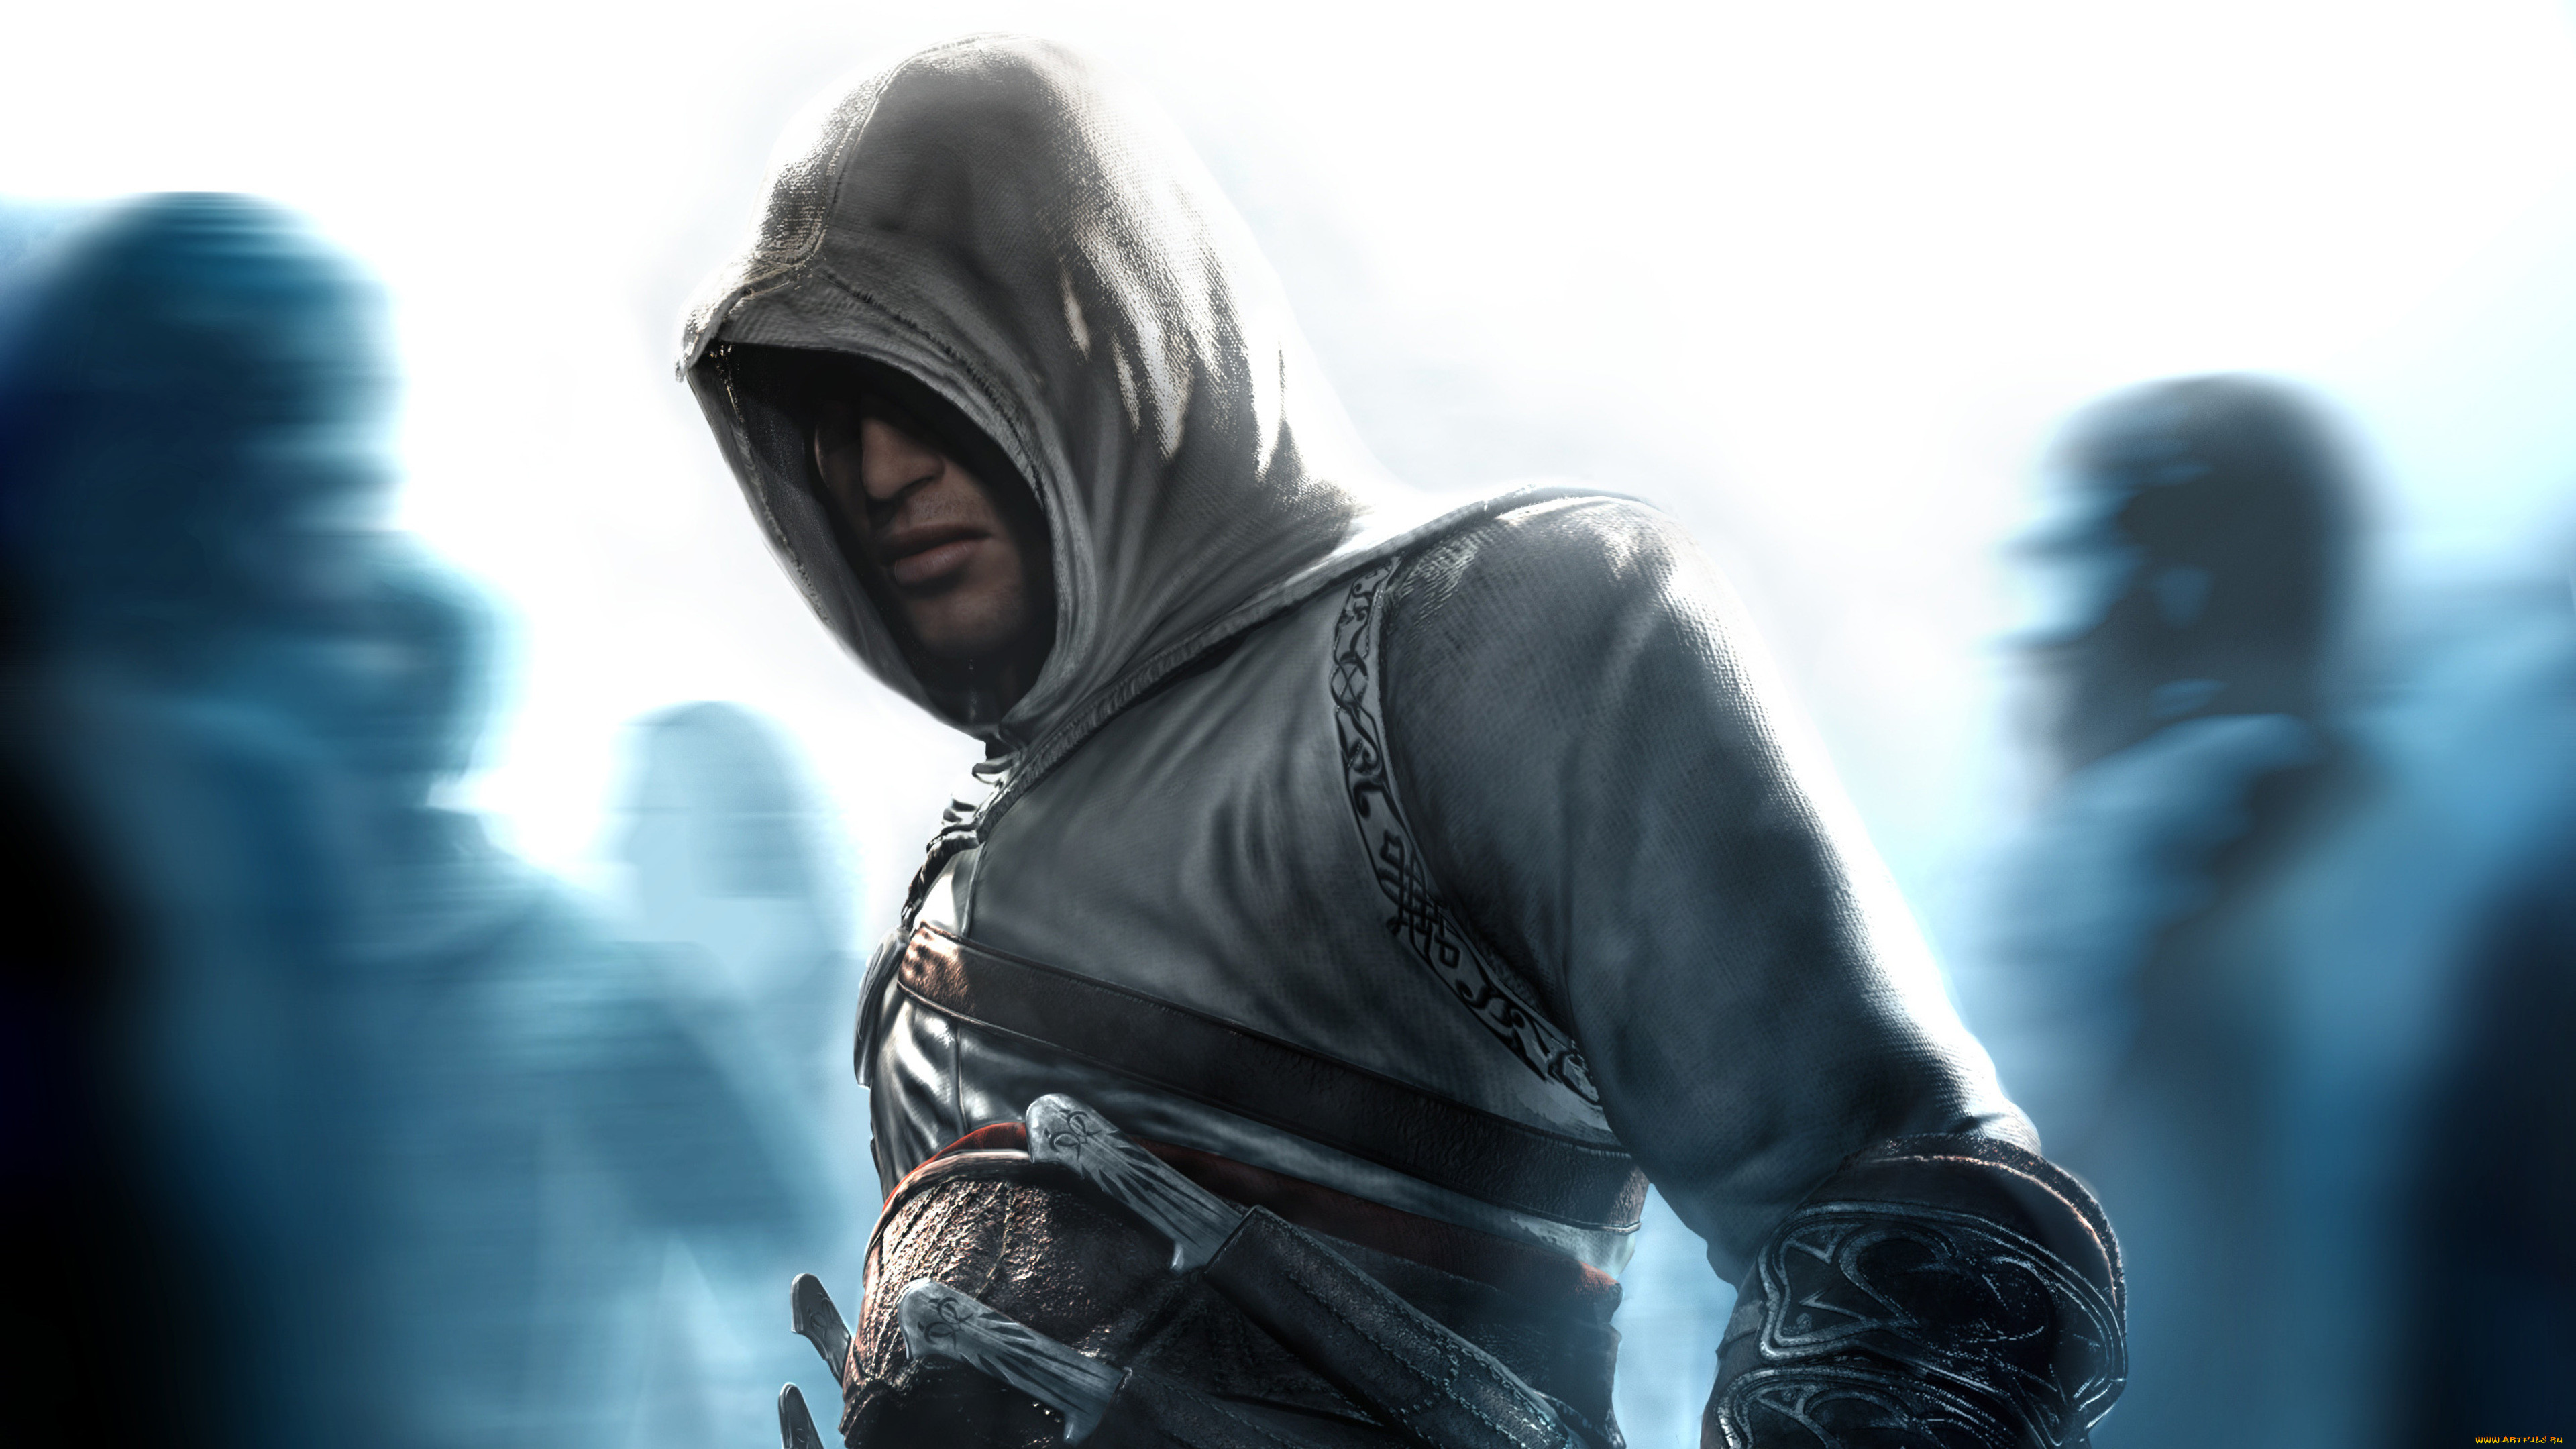  , assassin`s creed, assassin's, creed